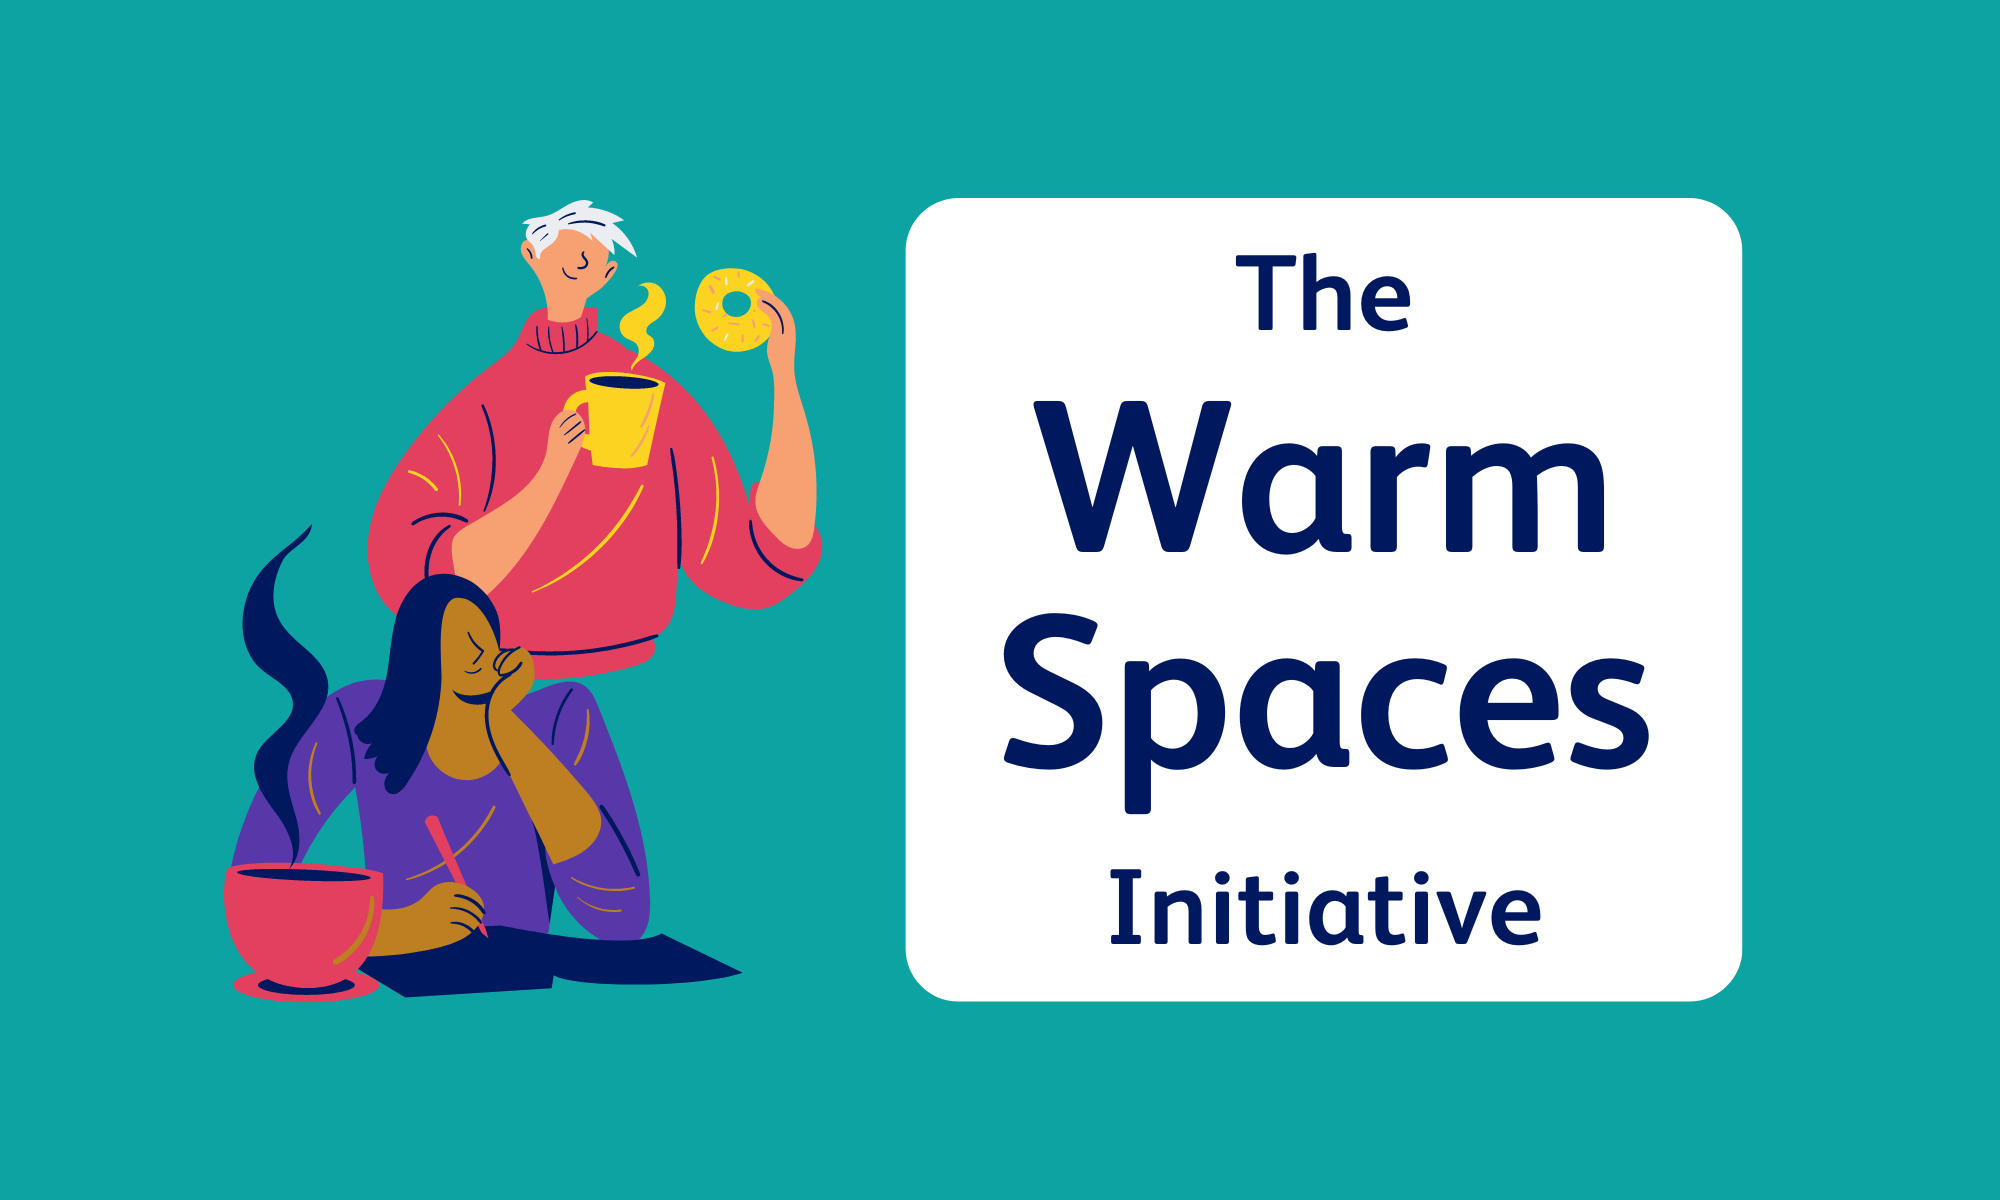 The Warm Spaces Initiative